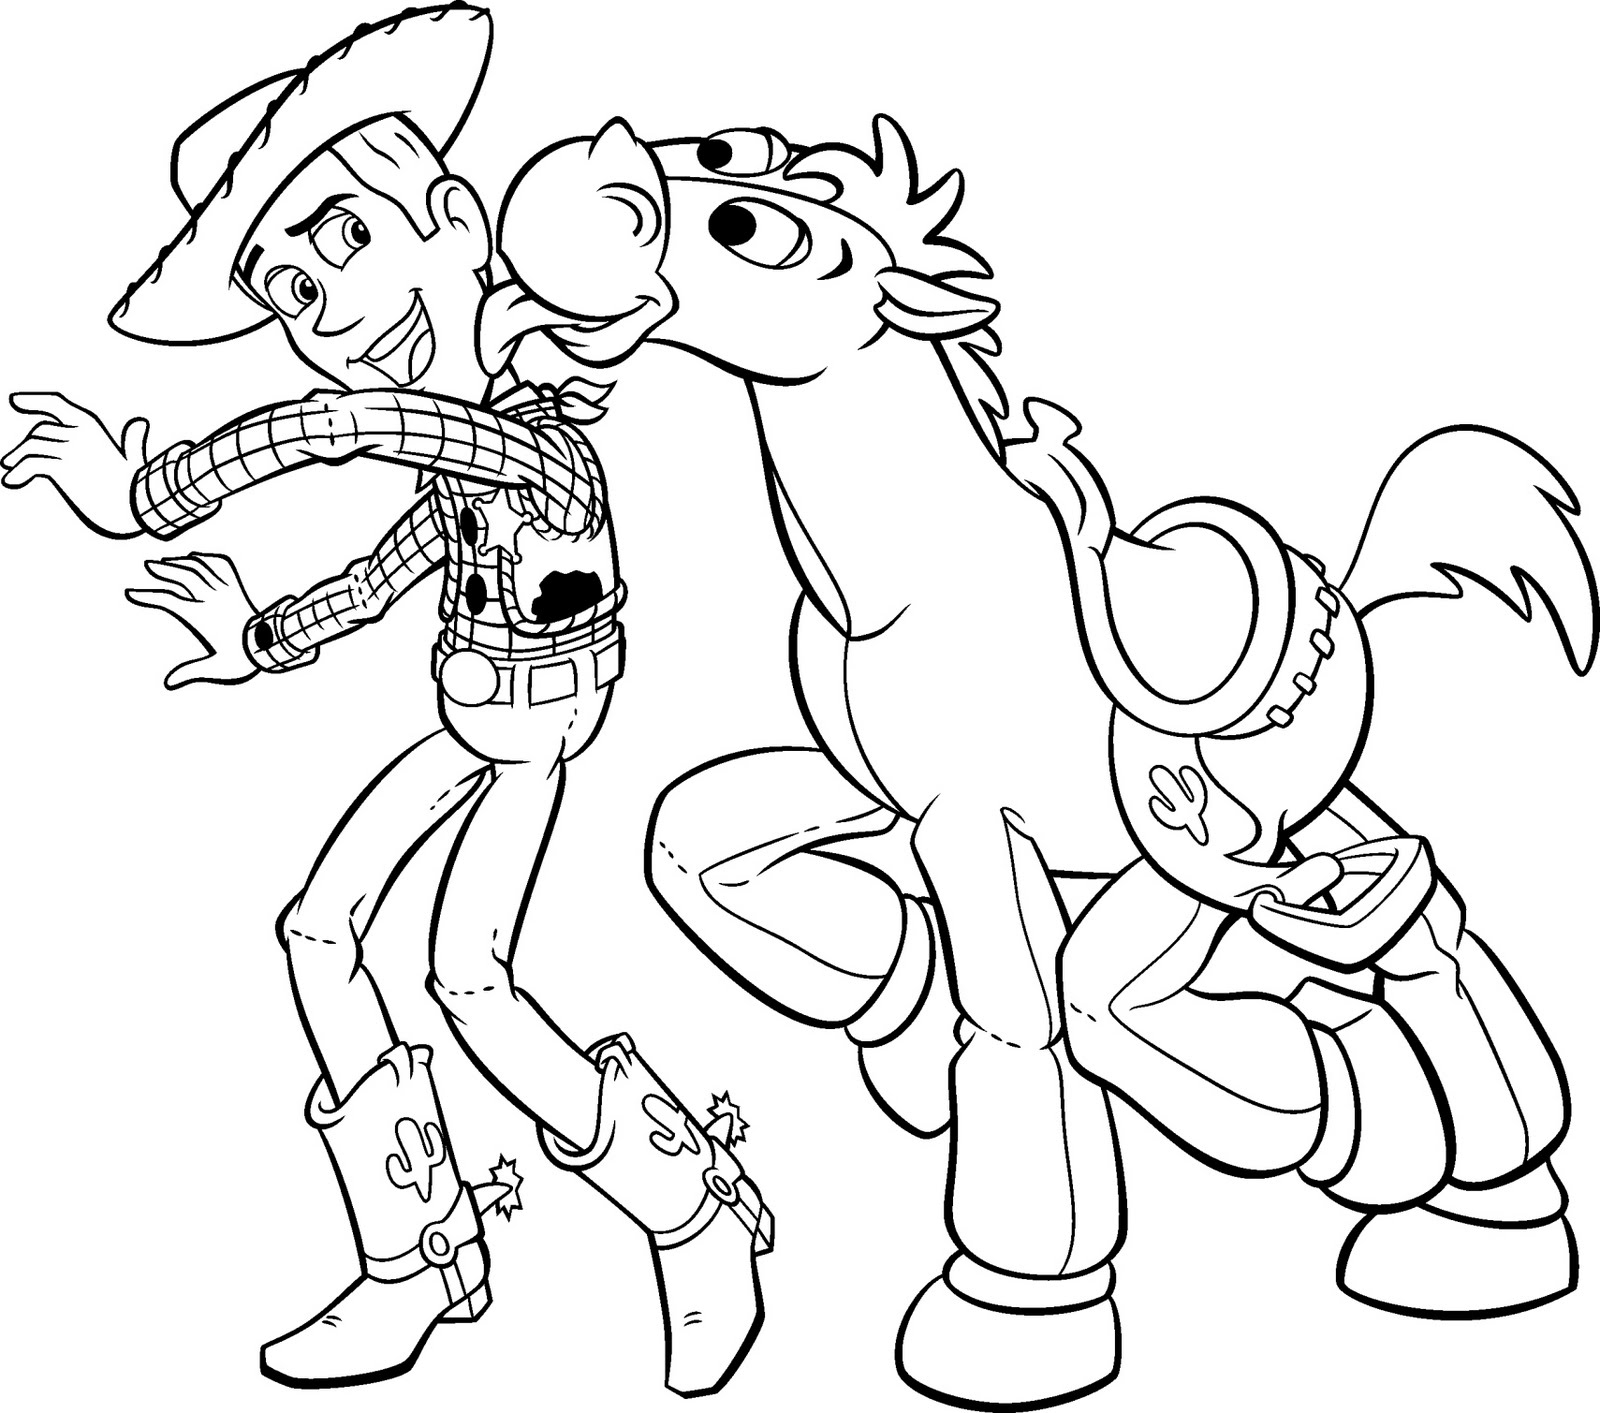 Download Woody Coloring Pages | Coloring Pages to Print